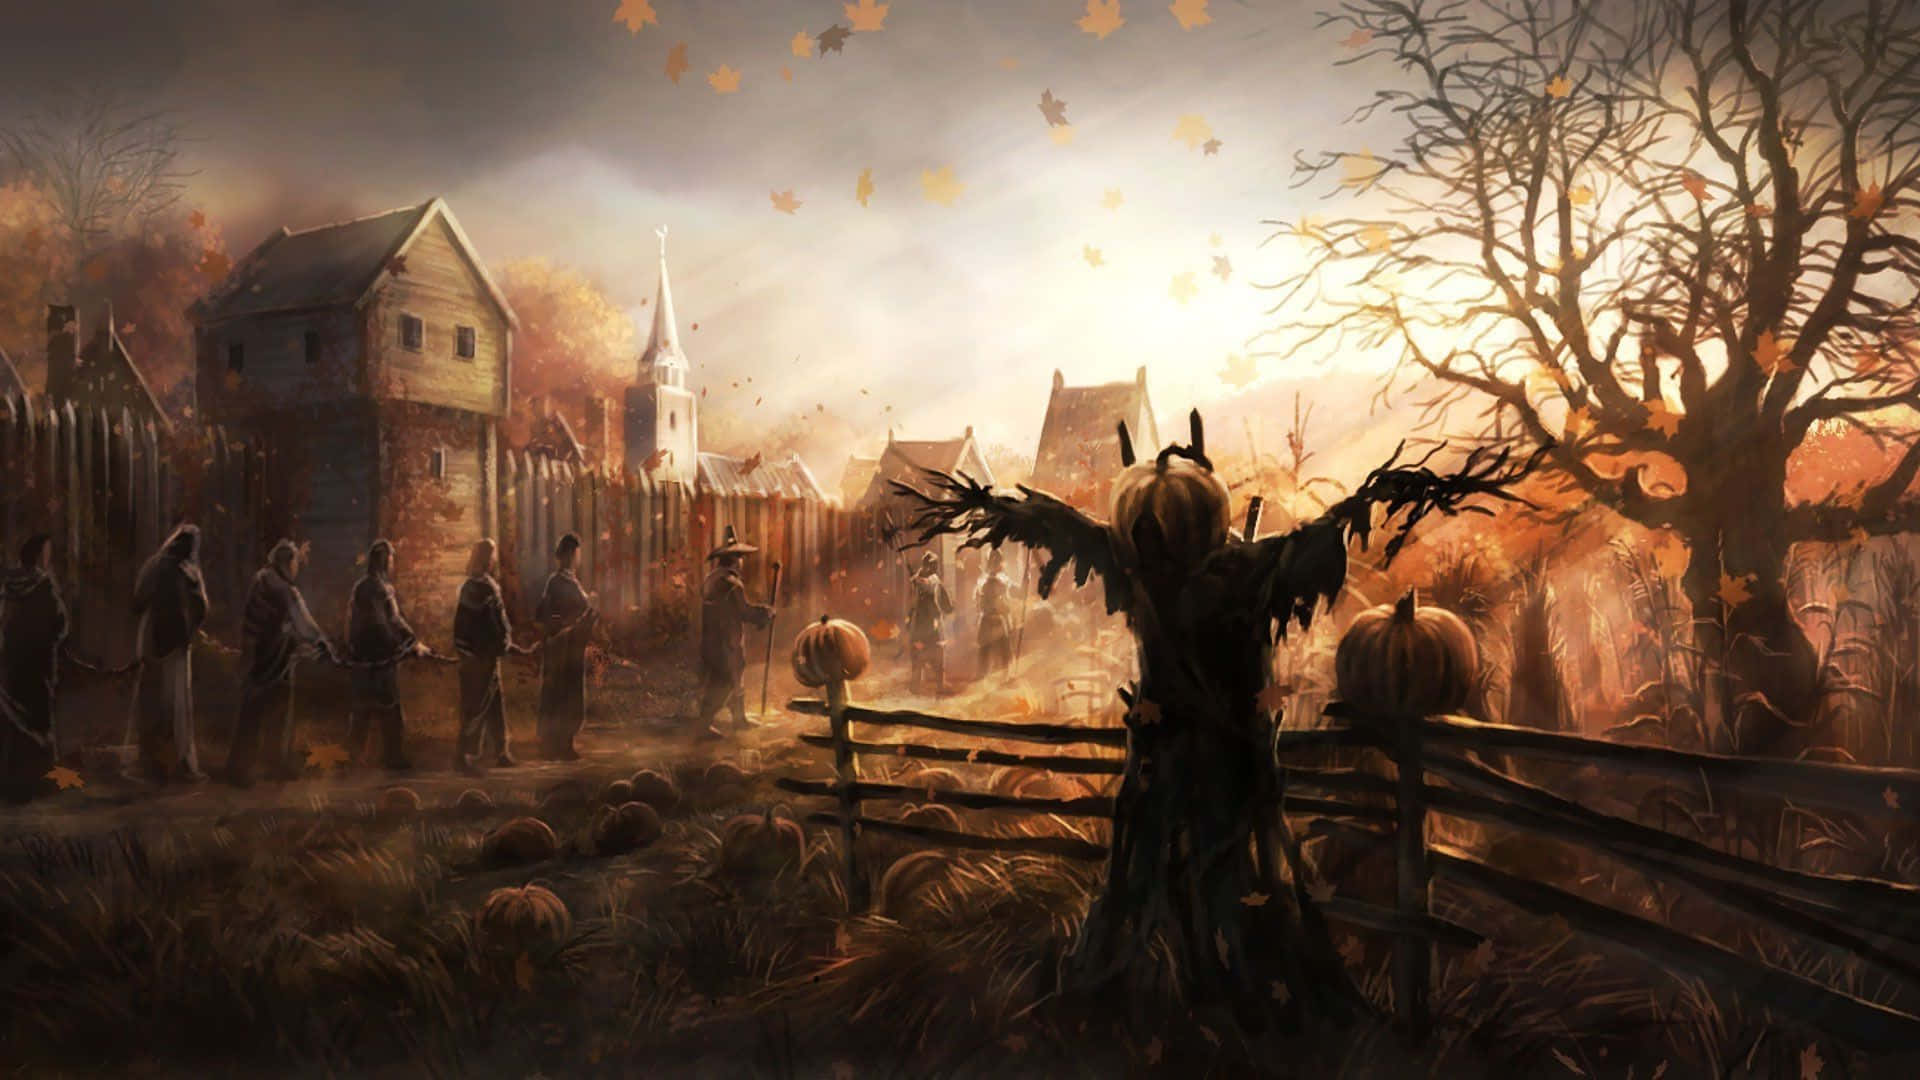 A Scarecrow's Autumnal View. Wallpaper